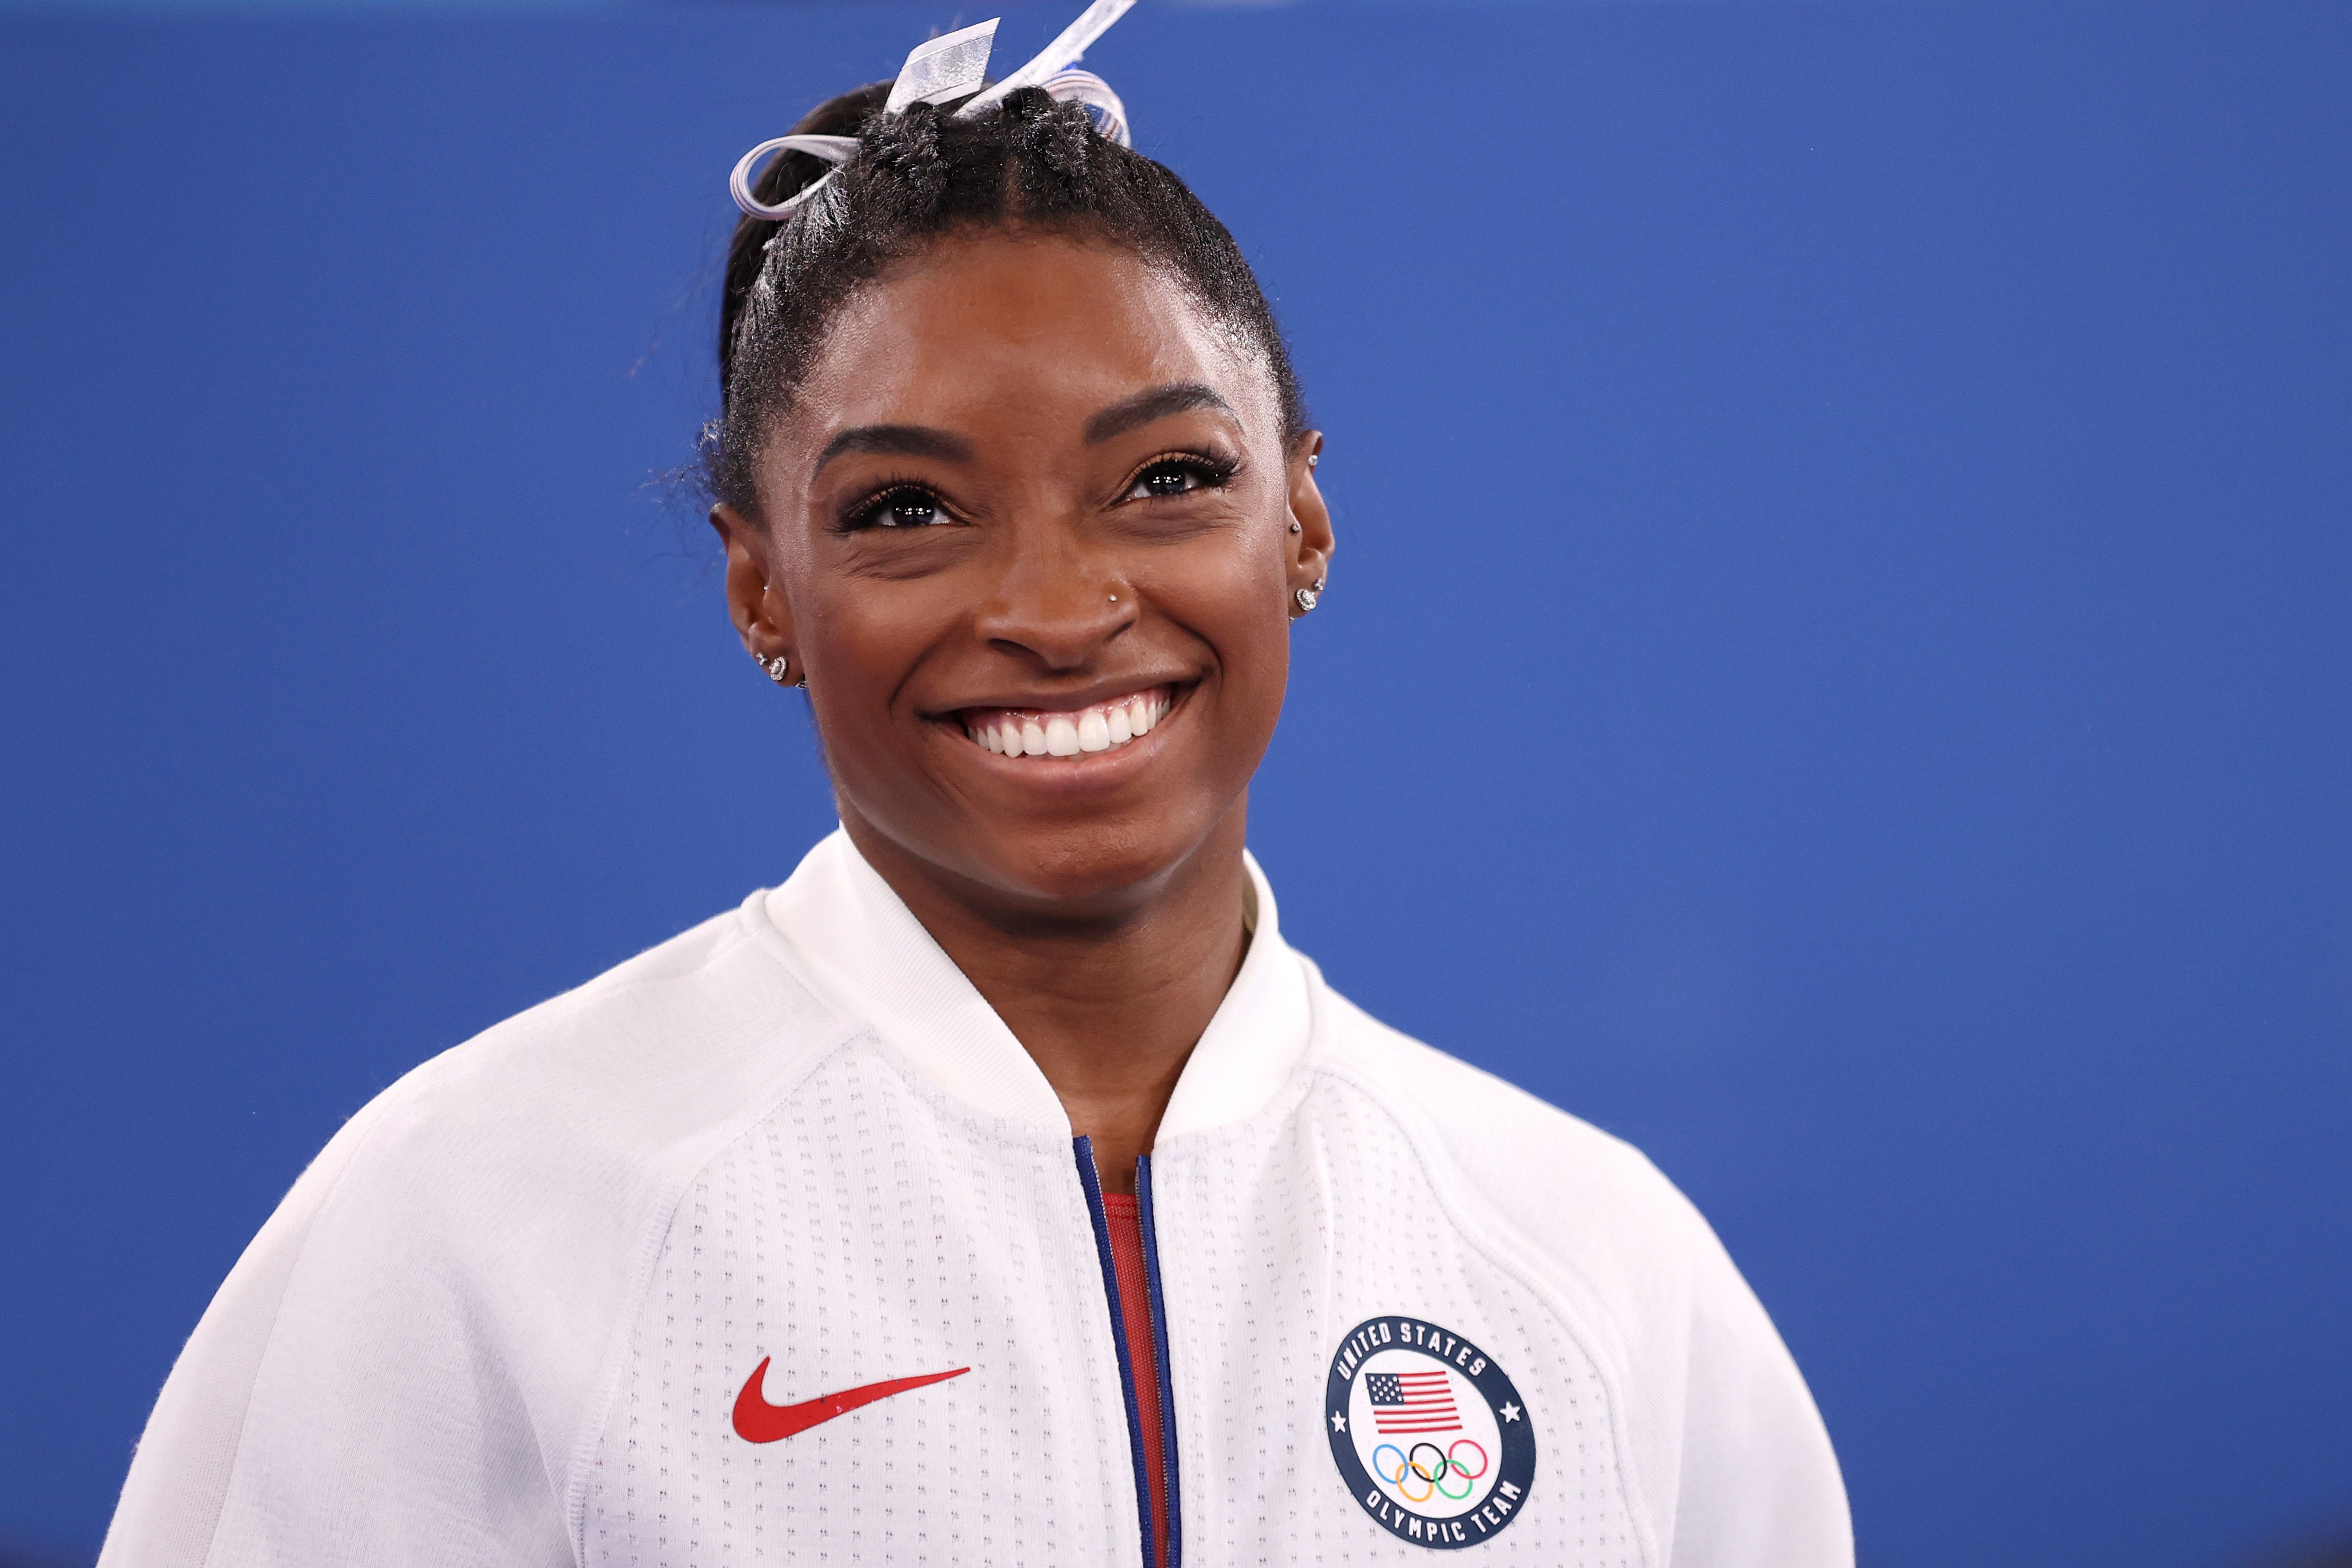 What Events Did Simone Biles Compete in at the 2020 Tokyo Olympics?